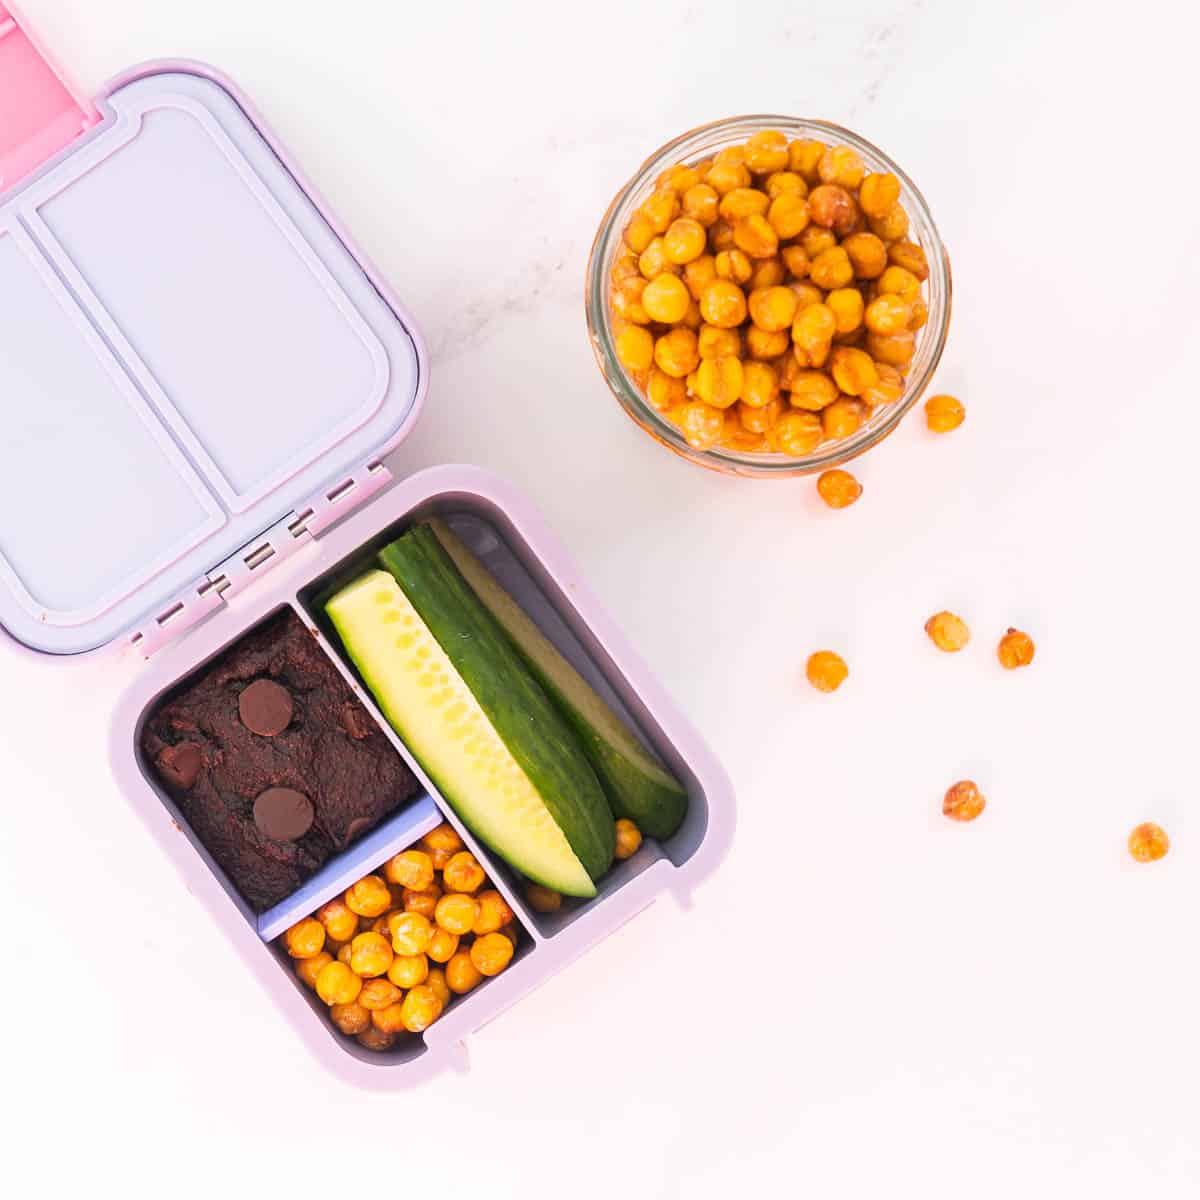 Roasted chickpeas in a lilac bento box with a piece of brownie and cucumber sticks.